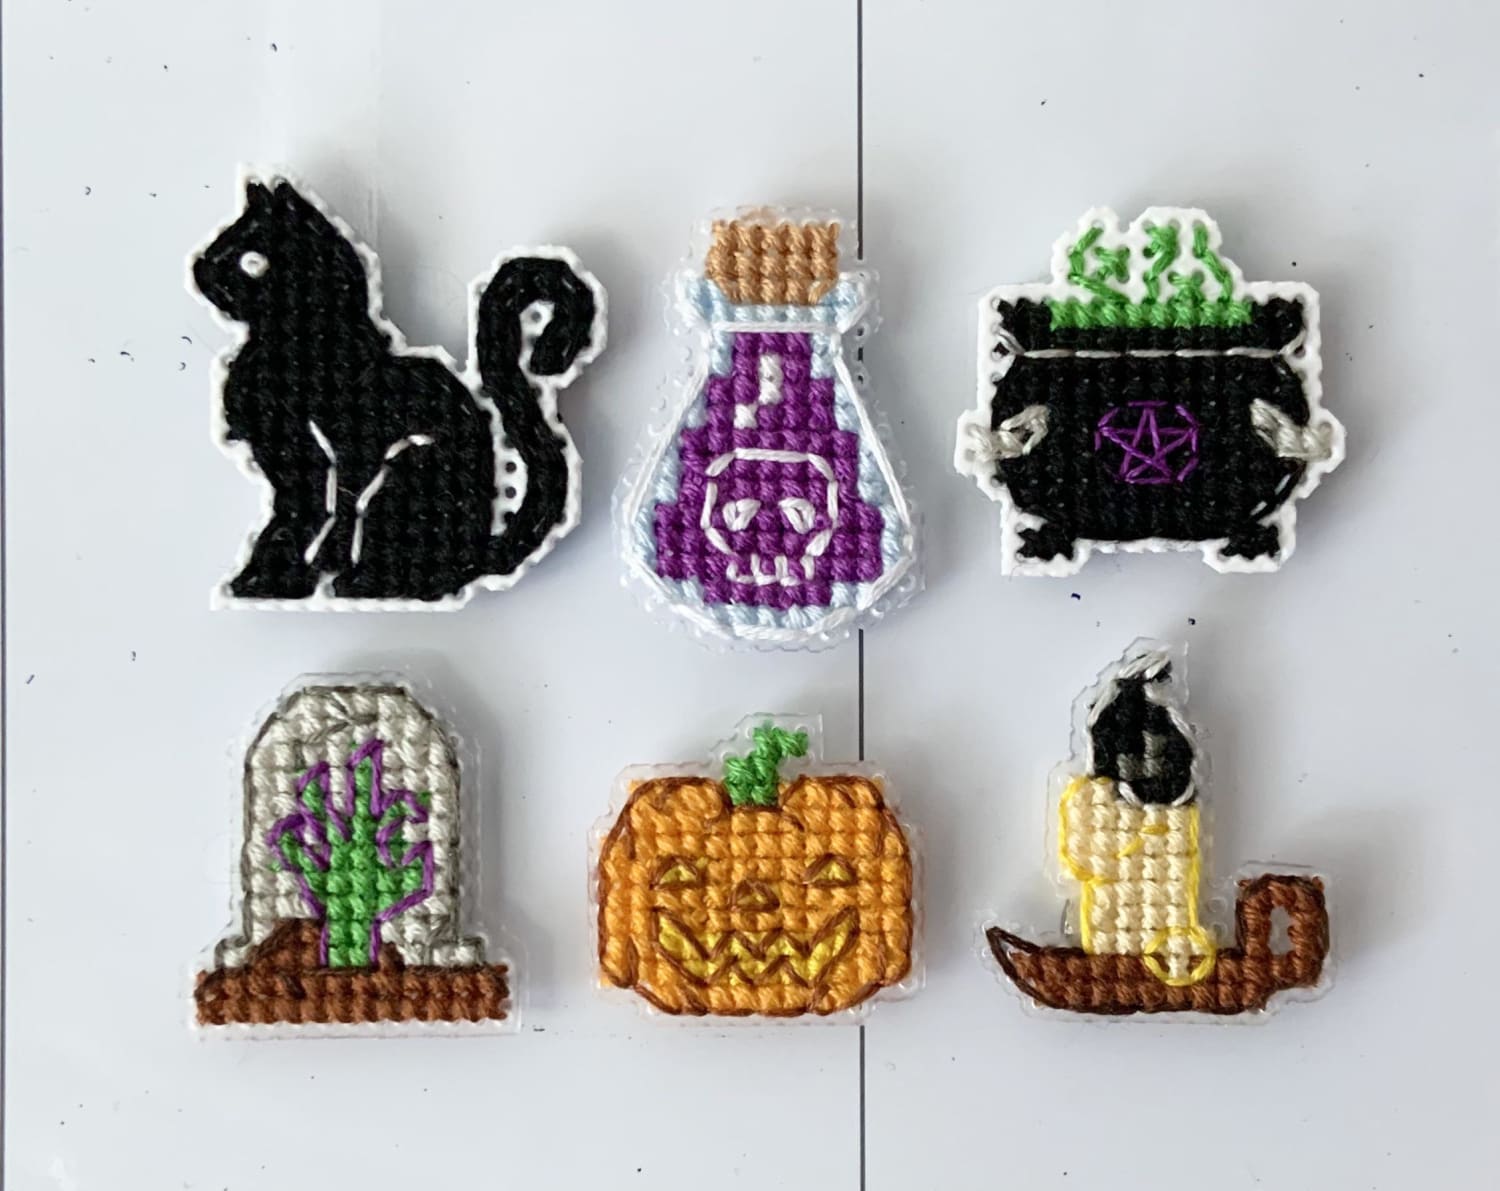 [FO] I only wanted to make one needle minder for my spooky stitching, I swear. All self drafted/designed.